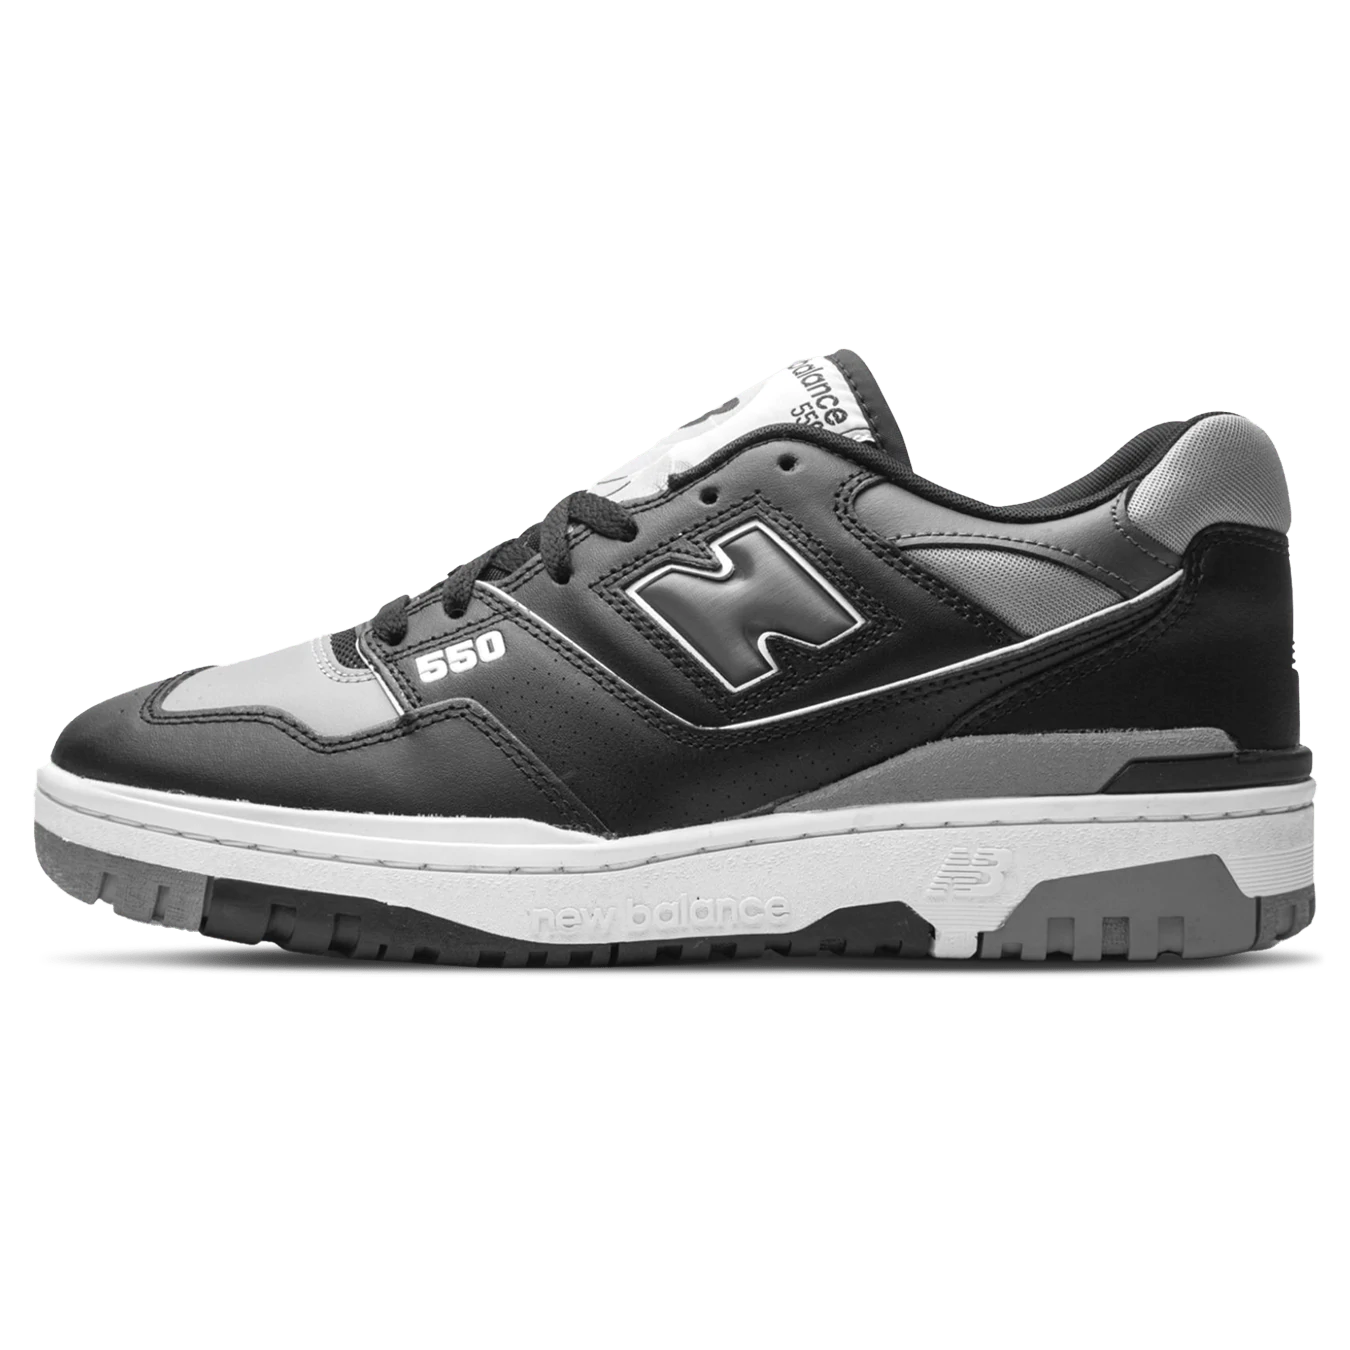 Double Boxed  234.99 New Balance 550 Shadow Grey Black Double Boxed